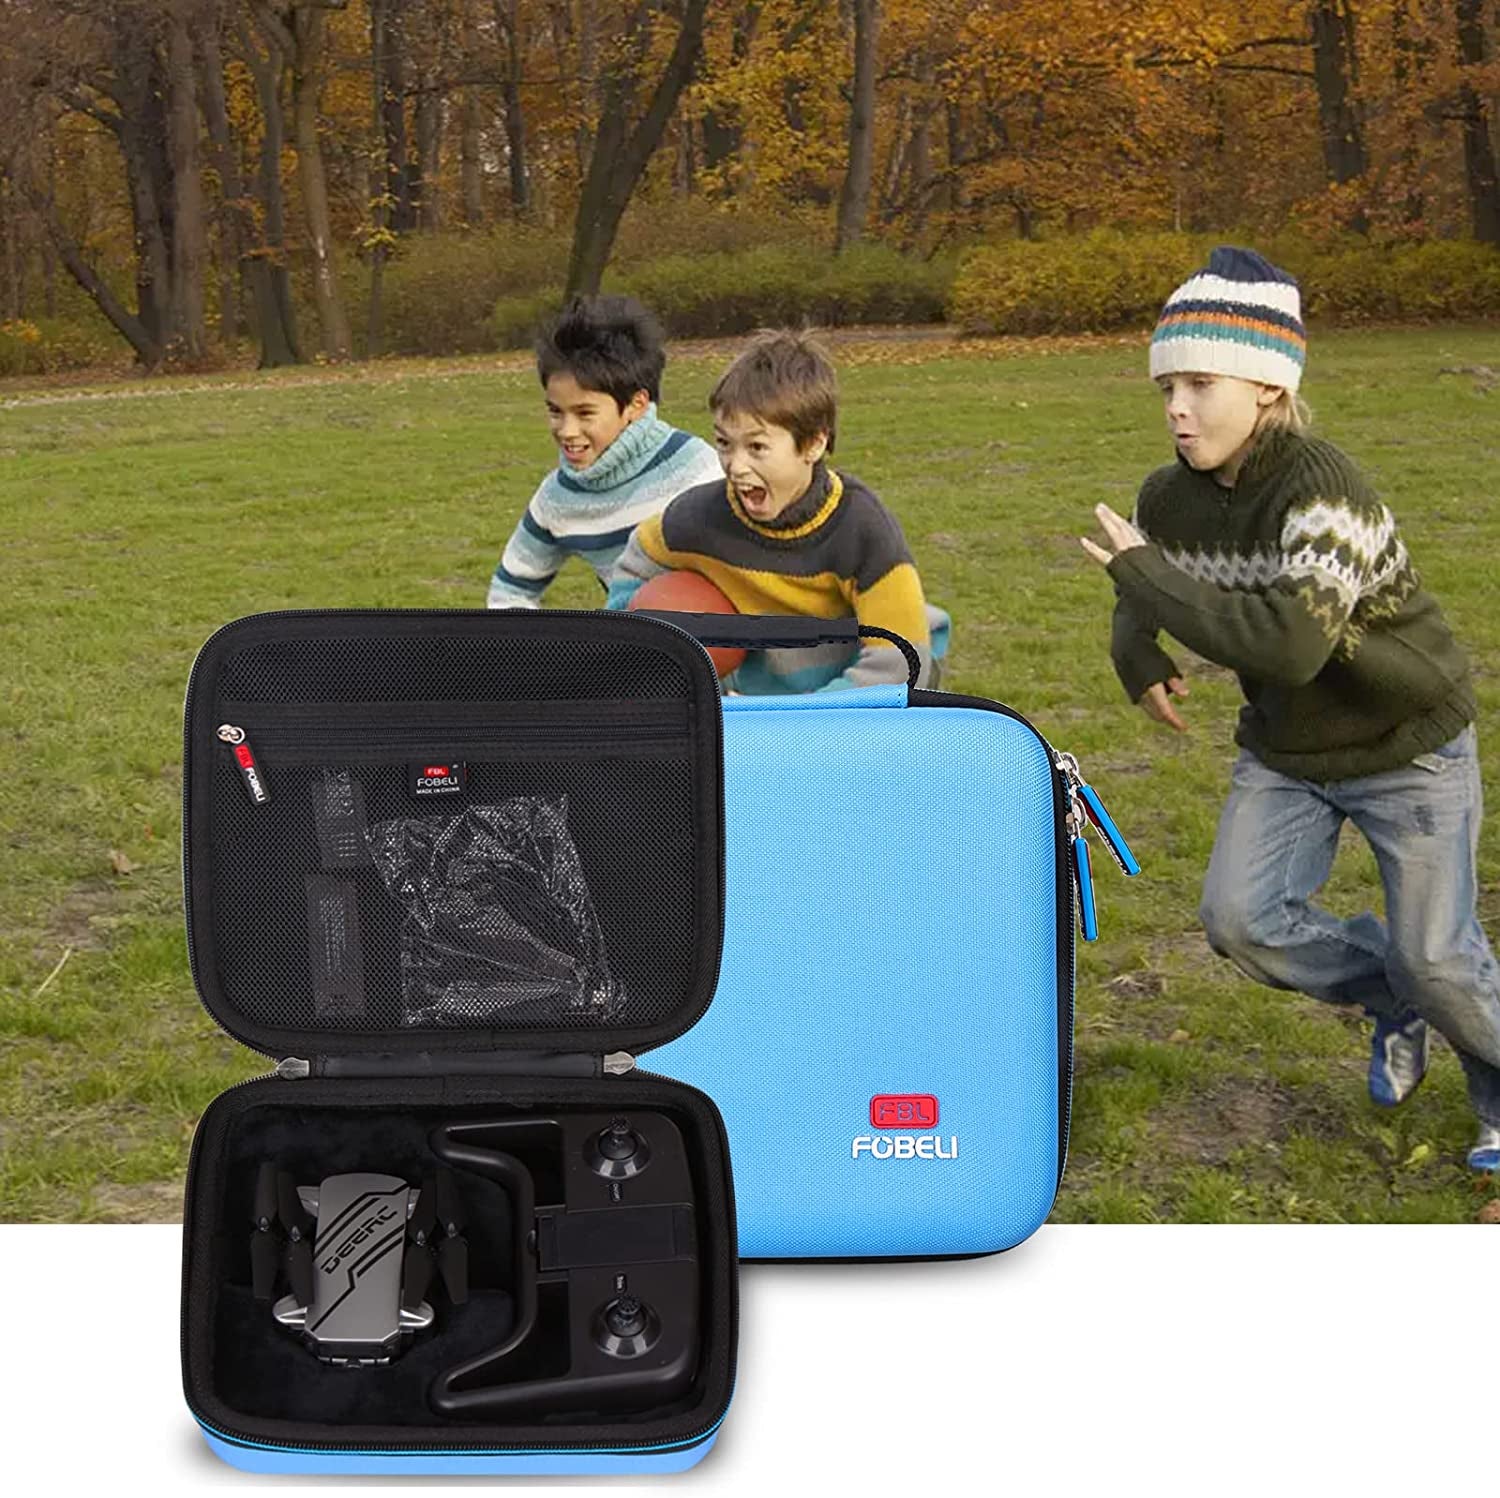 EVA Hard Carrying Case Compatible with DEERC D20 Mini Drone for Kids with 720P HD FPV